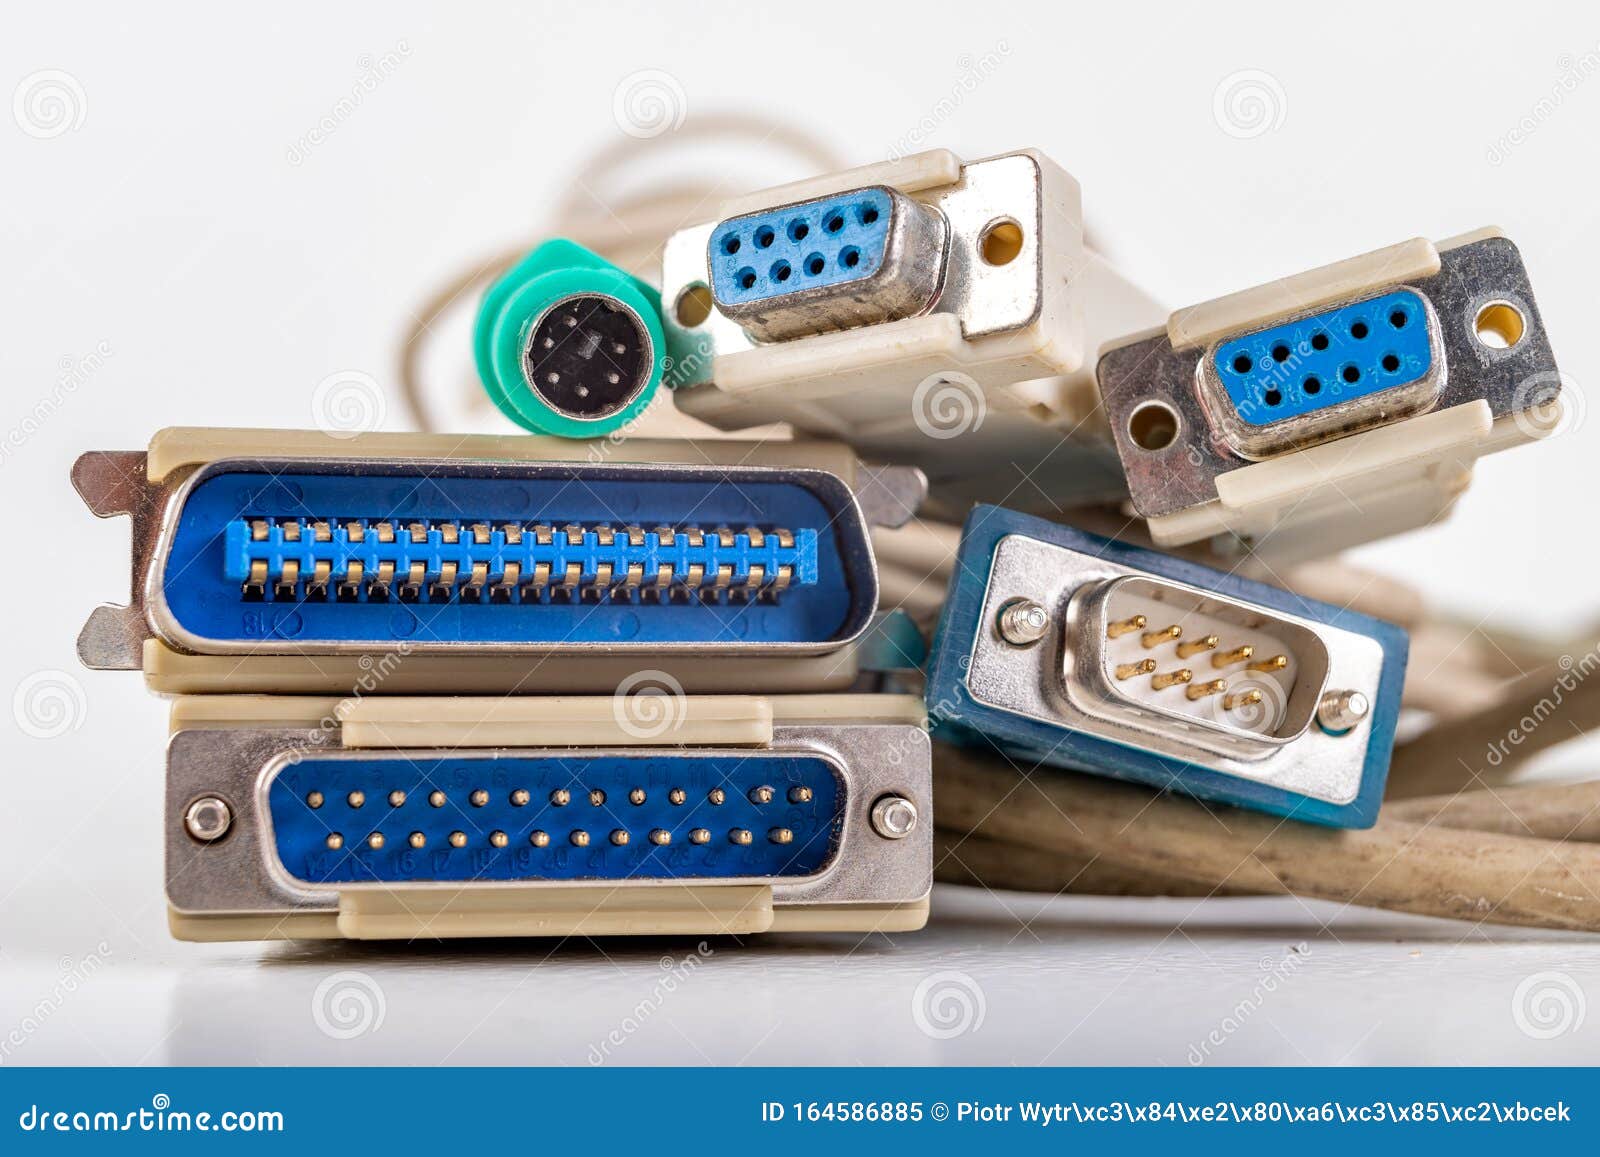 old-computer-cables-used-to-connect-peripheral-devices-plugs-connectors-old-applications-light-background-close-up-cord-164586885.jpg